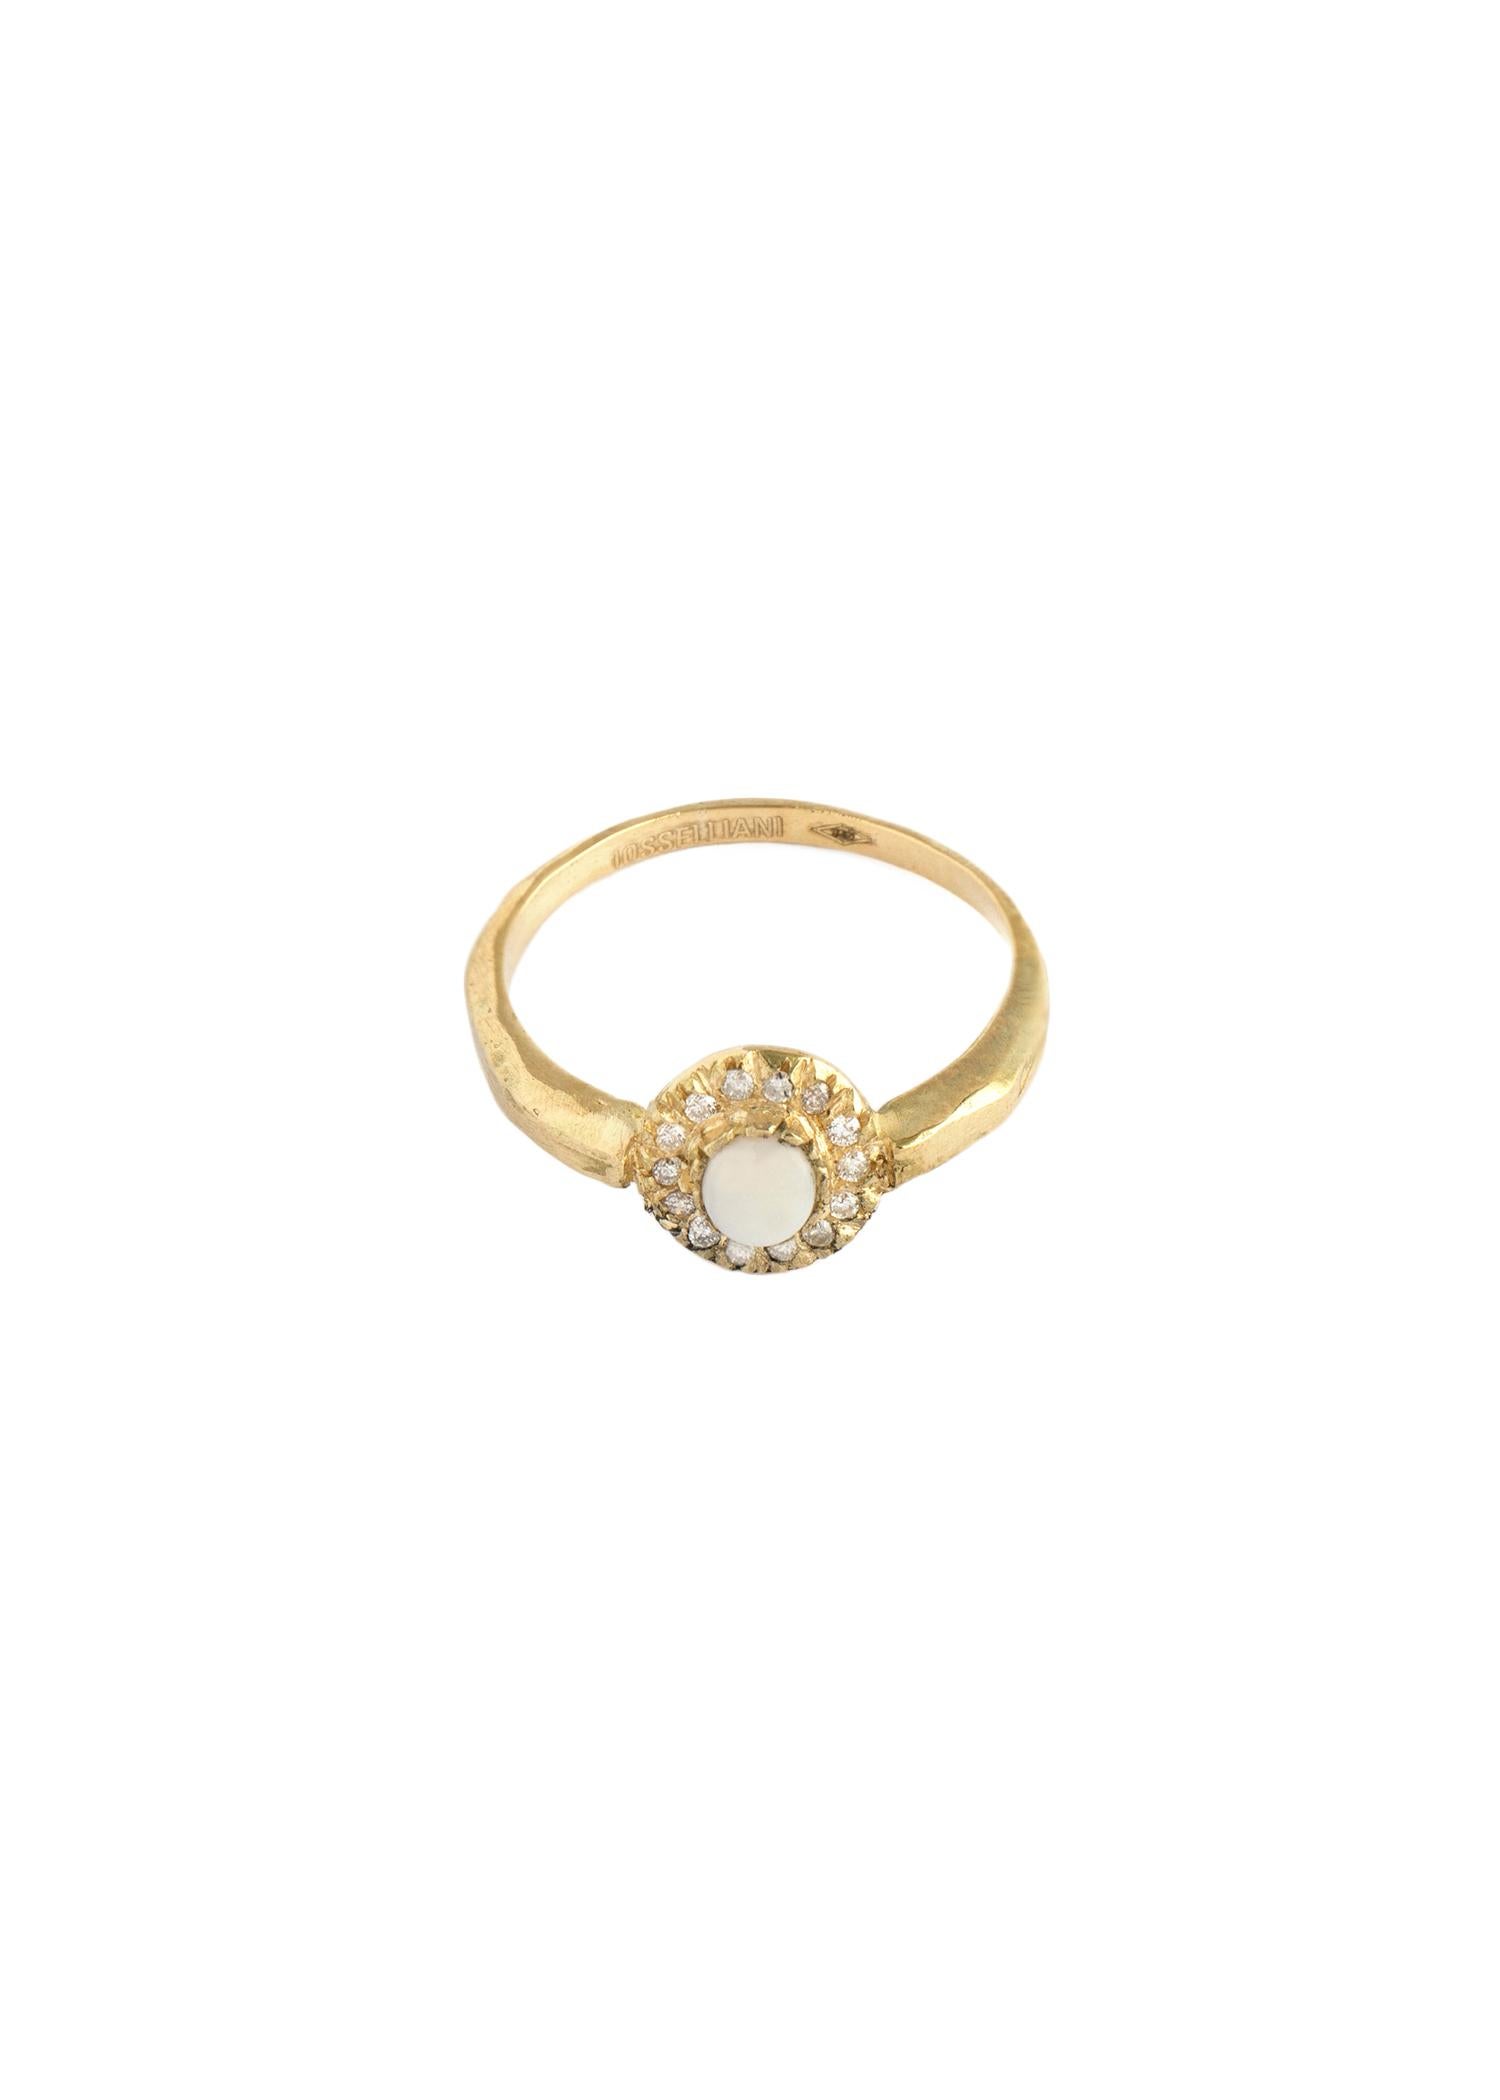 Round Cut Engagement Ring in 10 Carat Yellow Gold Opal and Rubies from IOSSELLIANI For Sale